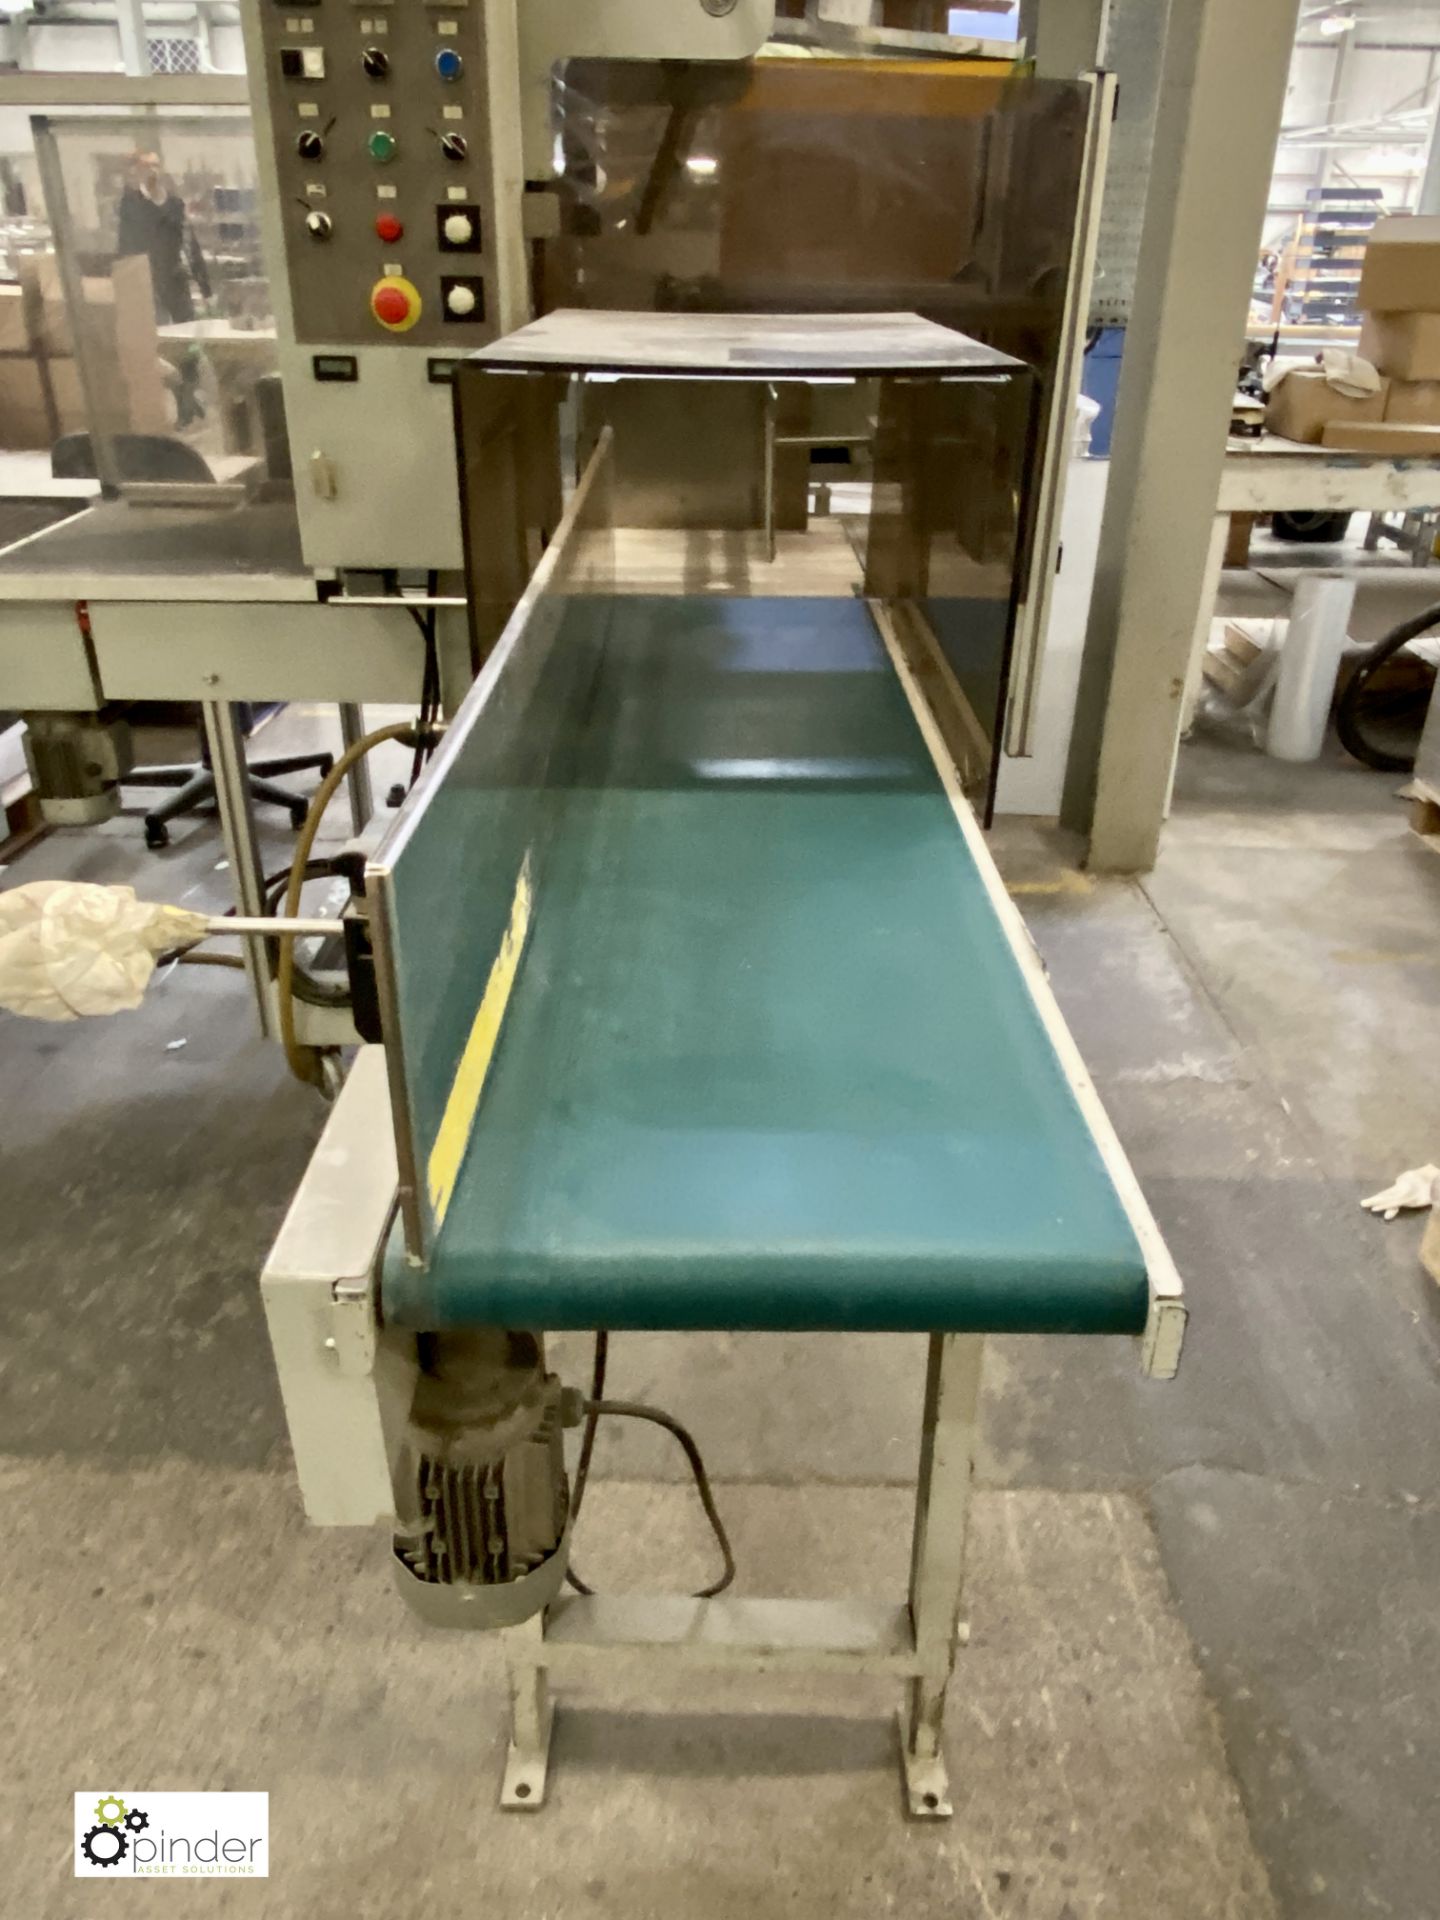 Rochman SVA60/35 Sleeve Sealer, 400volts, serial number 4881206, year 2007, with Rochman TR65/ - Image 5 of 15